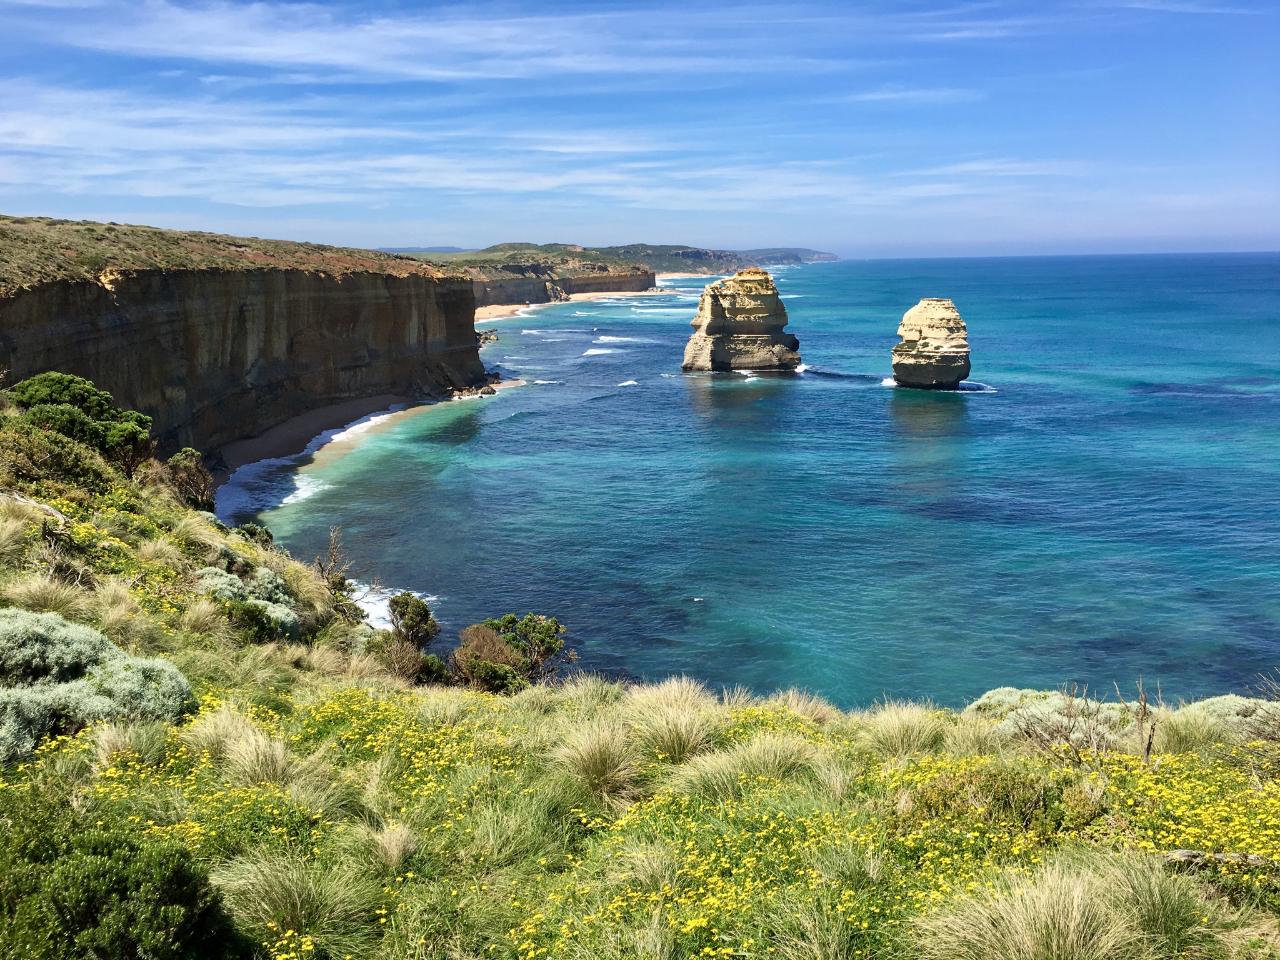 The Great Ocean Road and 12 Apostles Tour